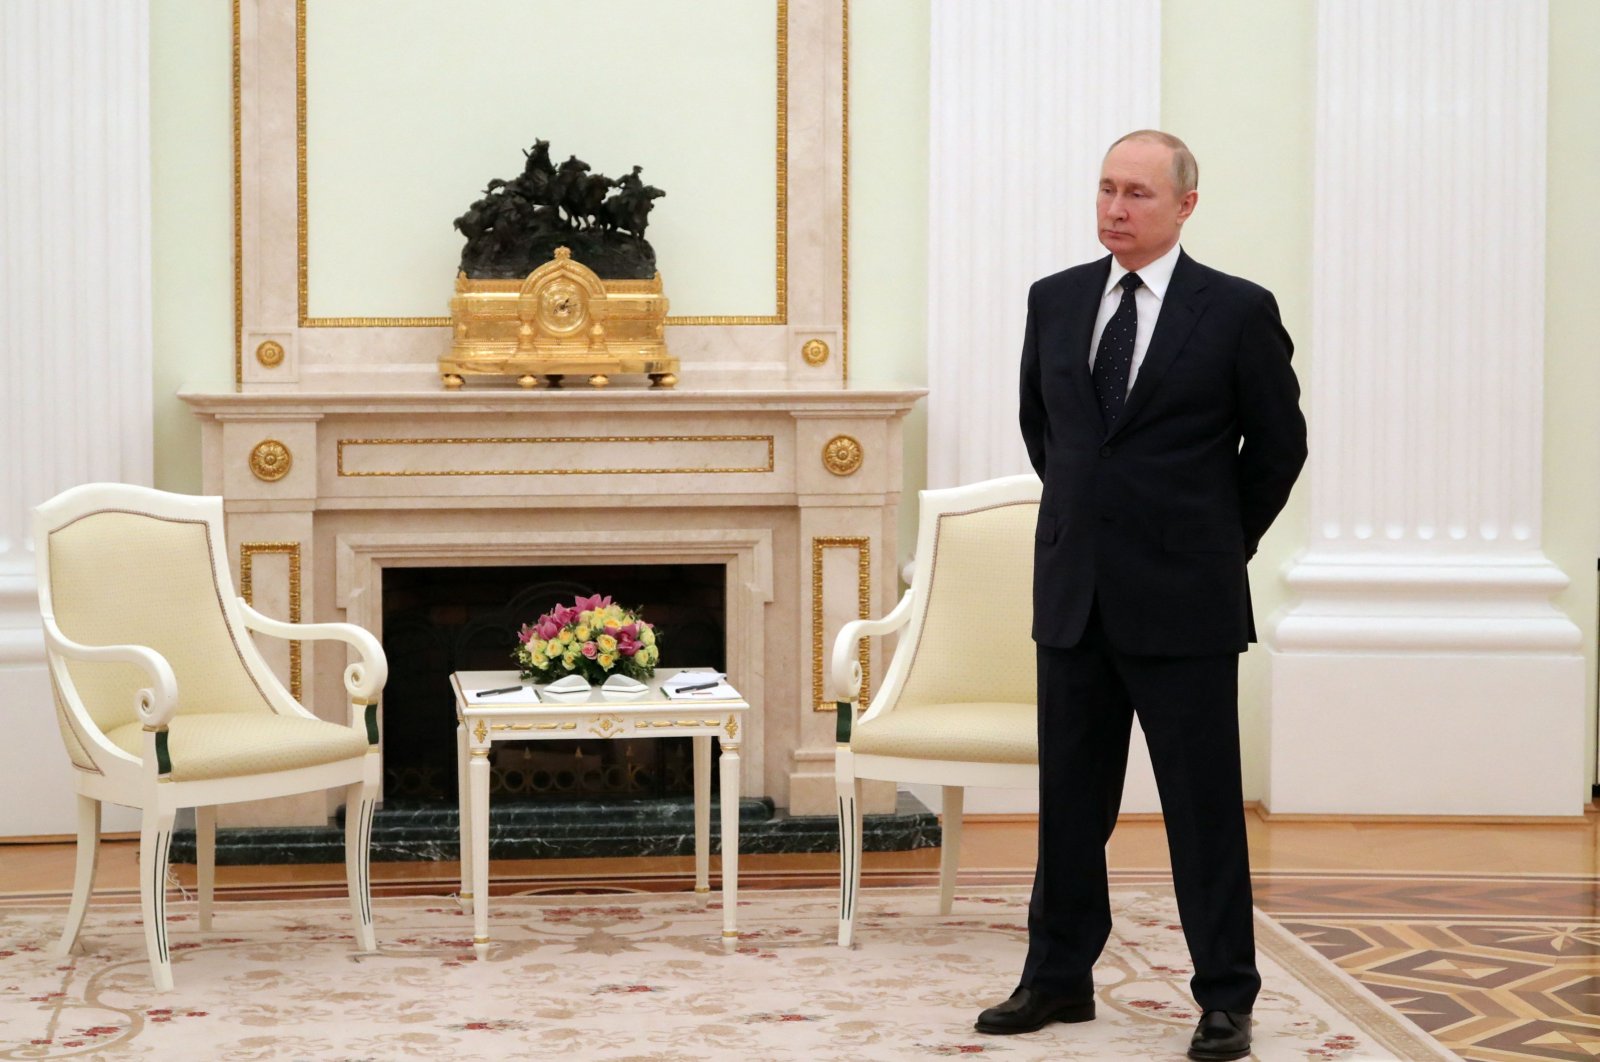 Russian President Vladimir Putin stands in a hall prior to a meeting at the Kremlin in Moscow, Russia, March 11, 2022. (AFP Photo)